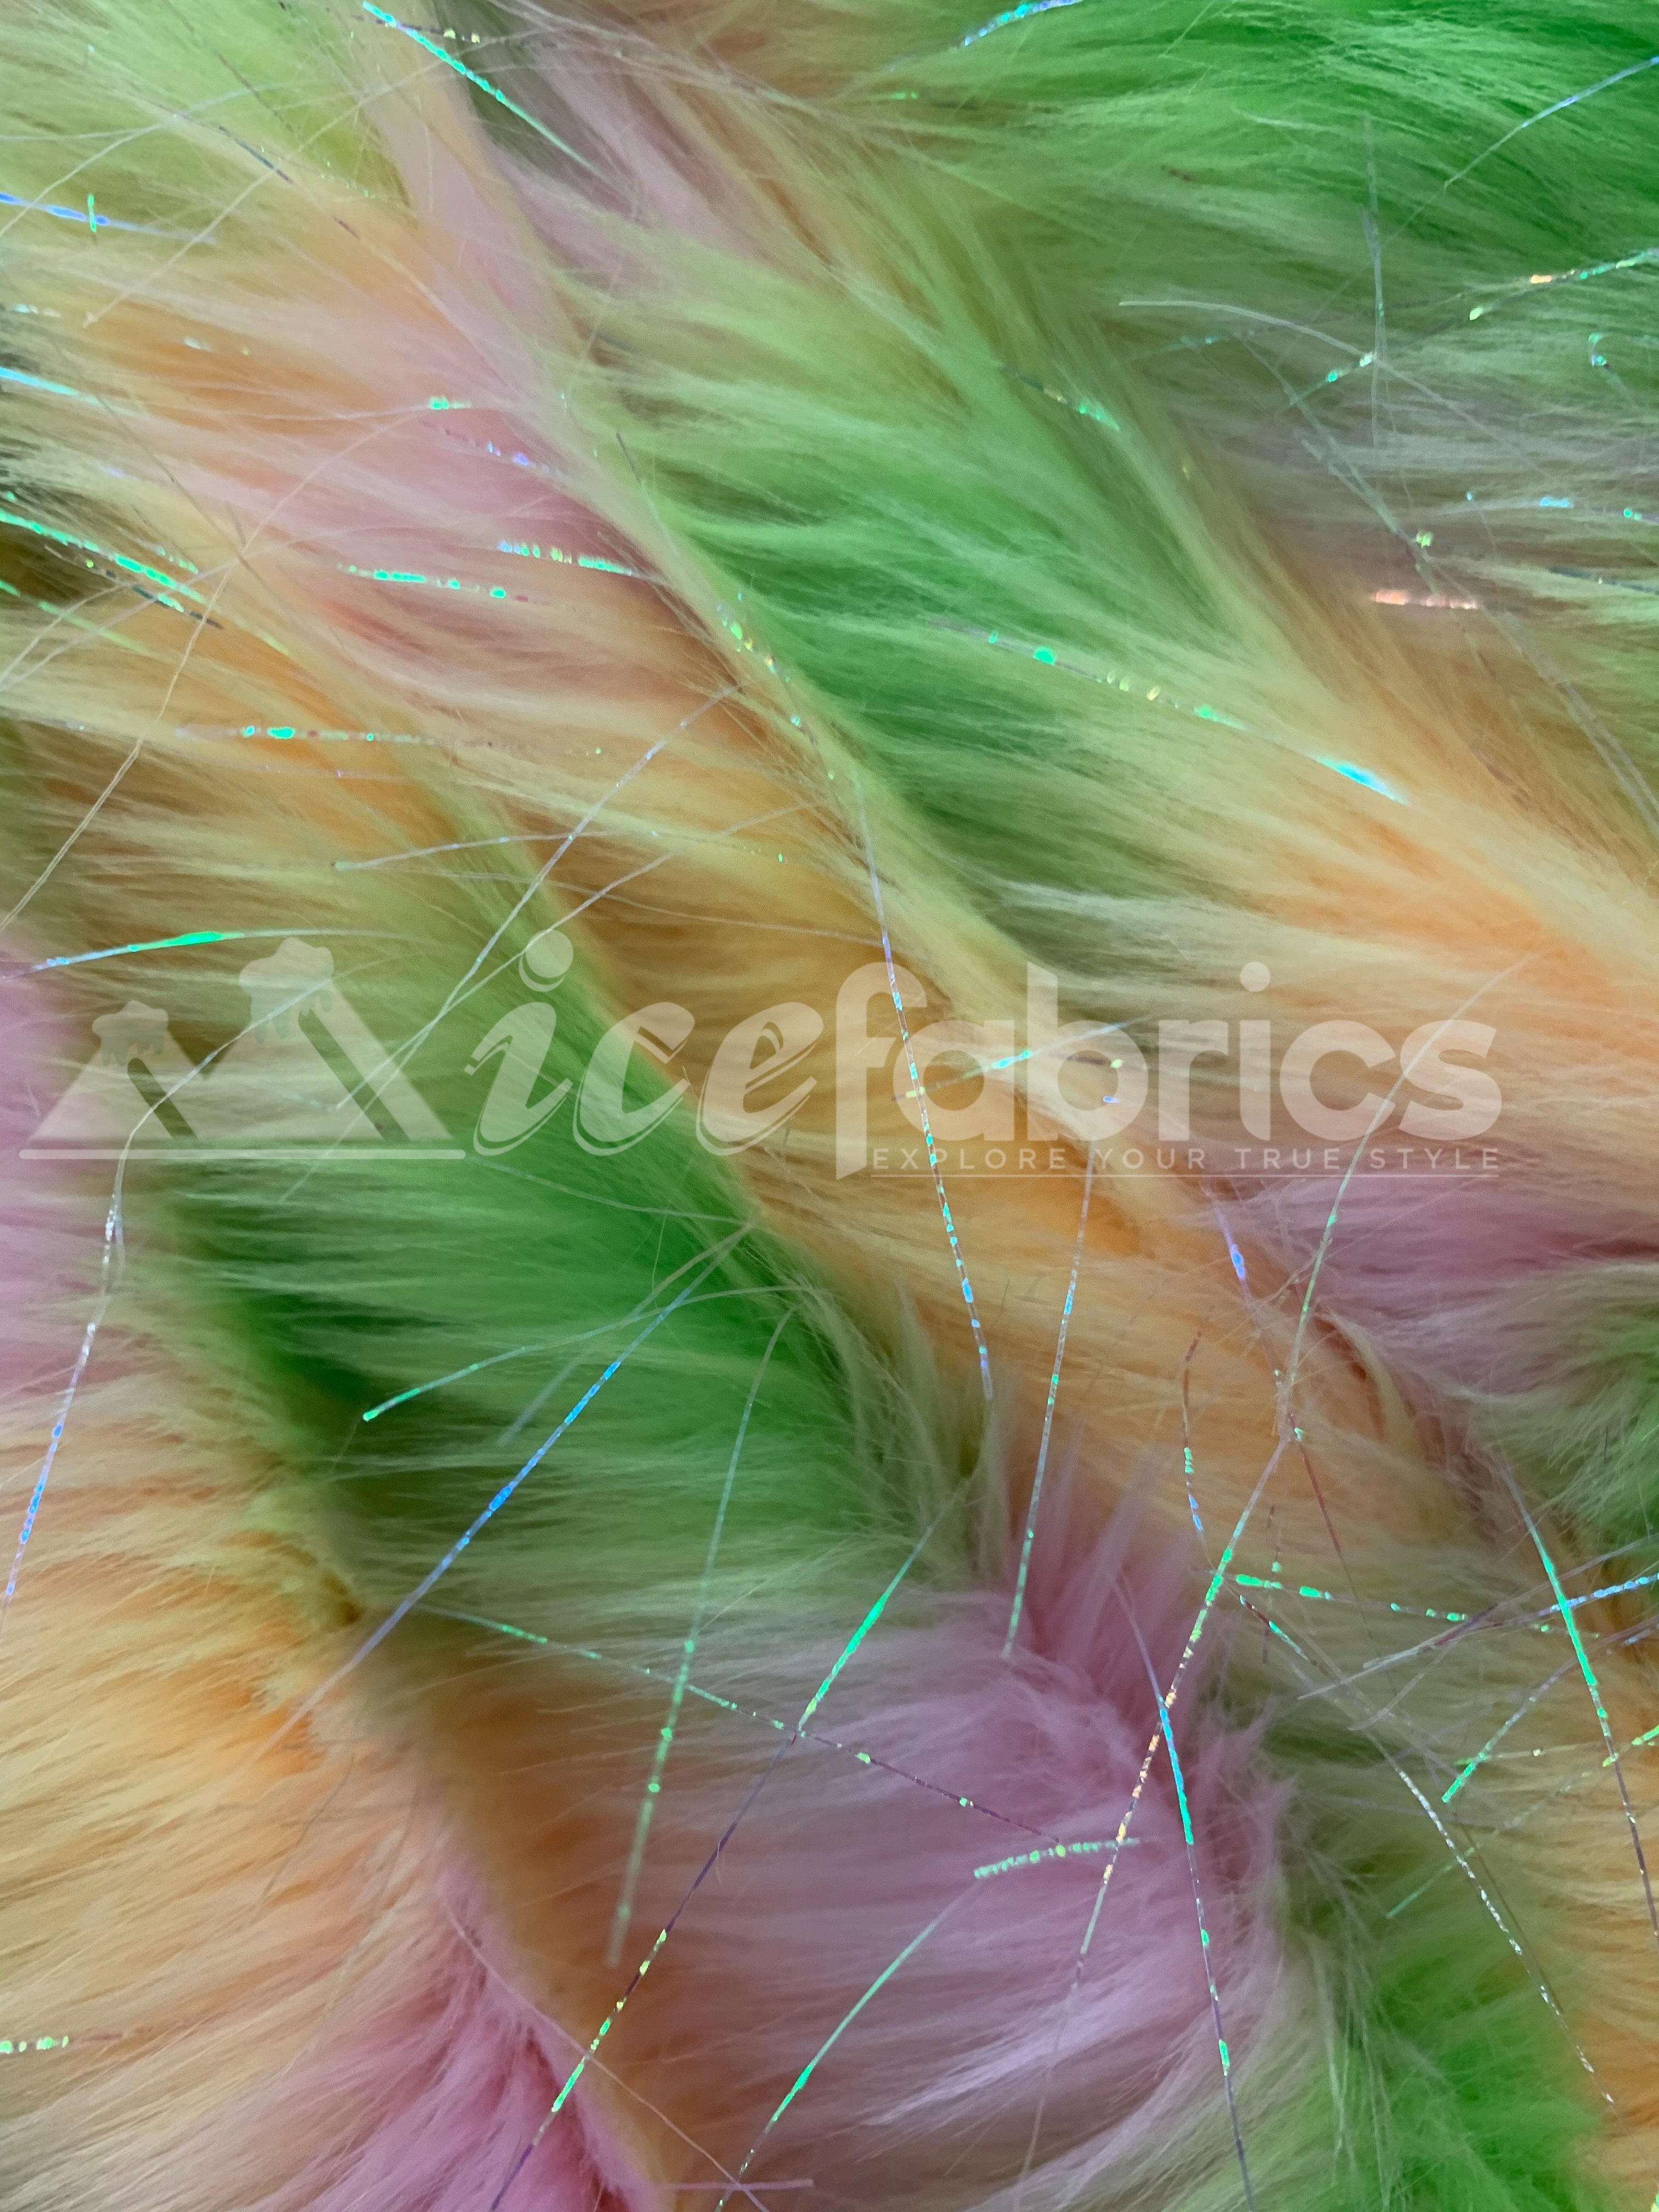 3 Tone Rainbow Tinsel 3.5" long Pile Green, Gold, and White Faux Fur Fabric By The YardICEFABRICICE FABRICSBy The Yard (60 inches Wide)3 Tone Rainbow Tinsel 3.5" long Pile Green, Gold, and White Faux Fur Fabric By The Yard ICEFABRIC